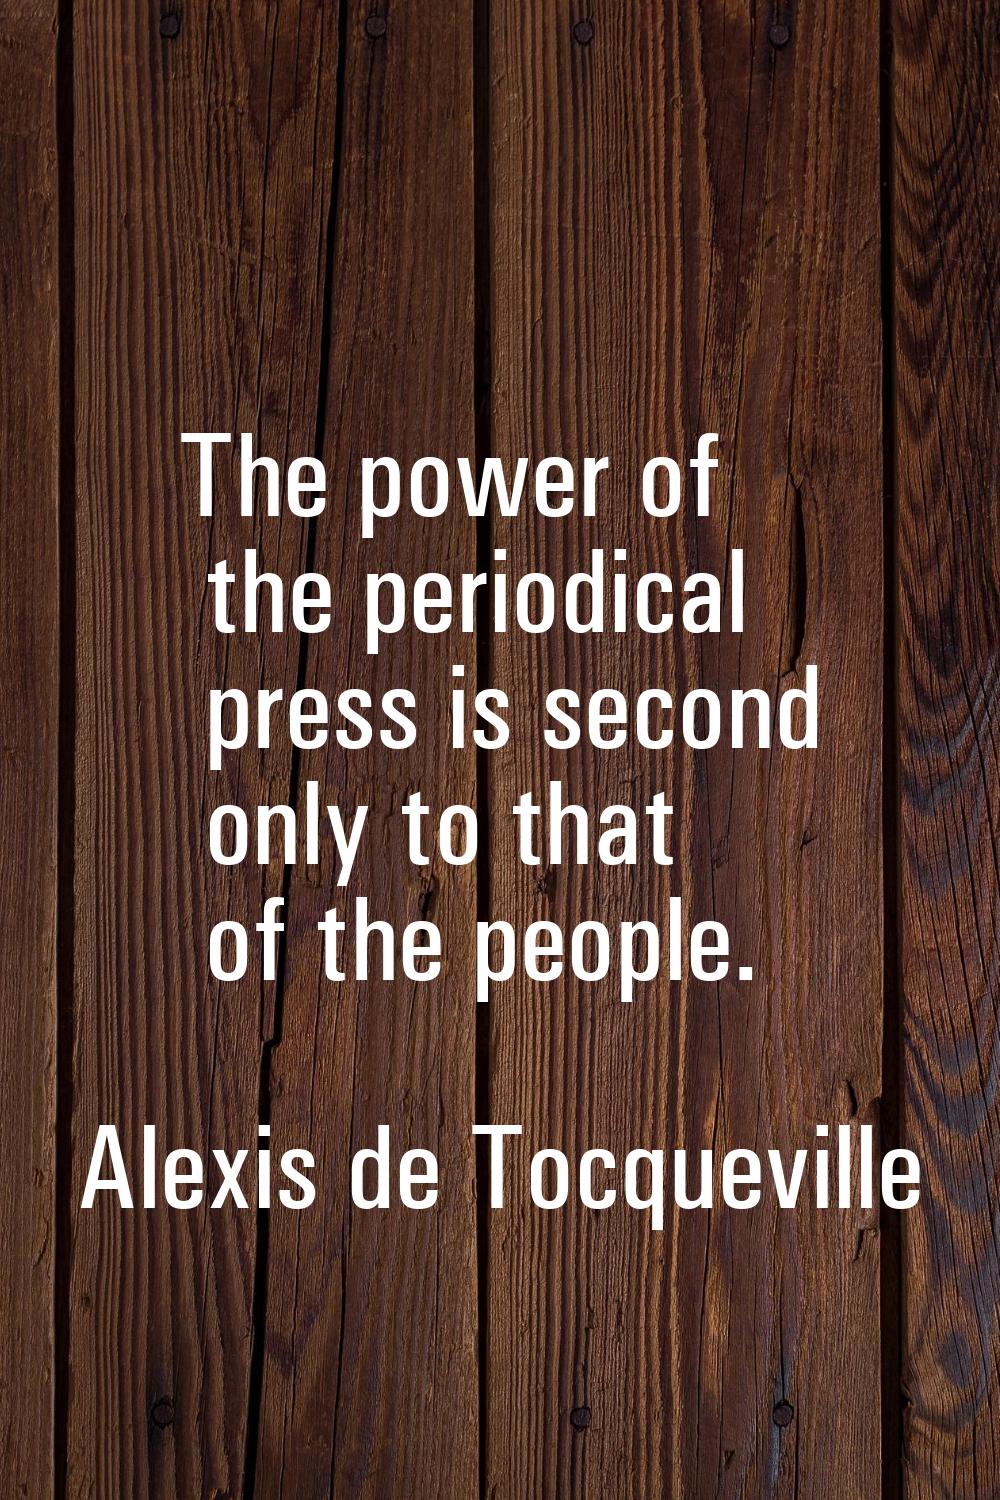 The power of the periodical press is second only to that of the people.